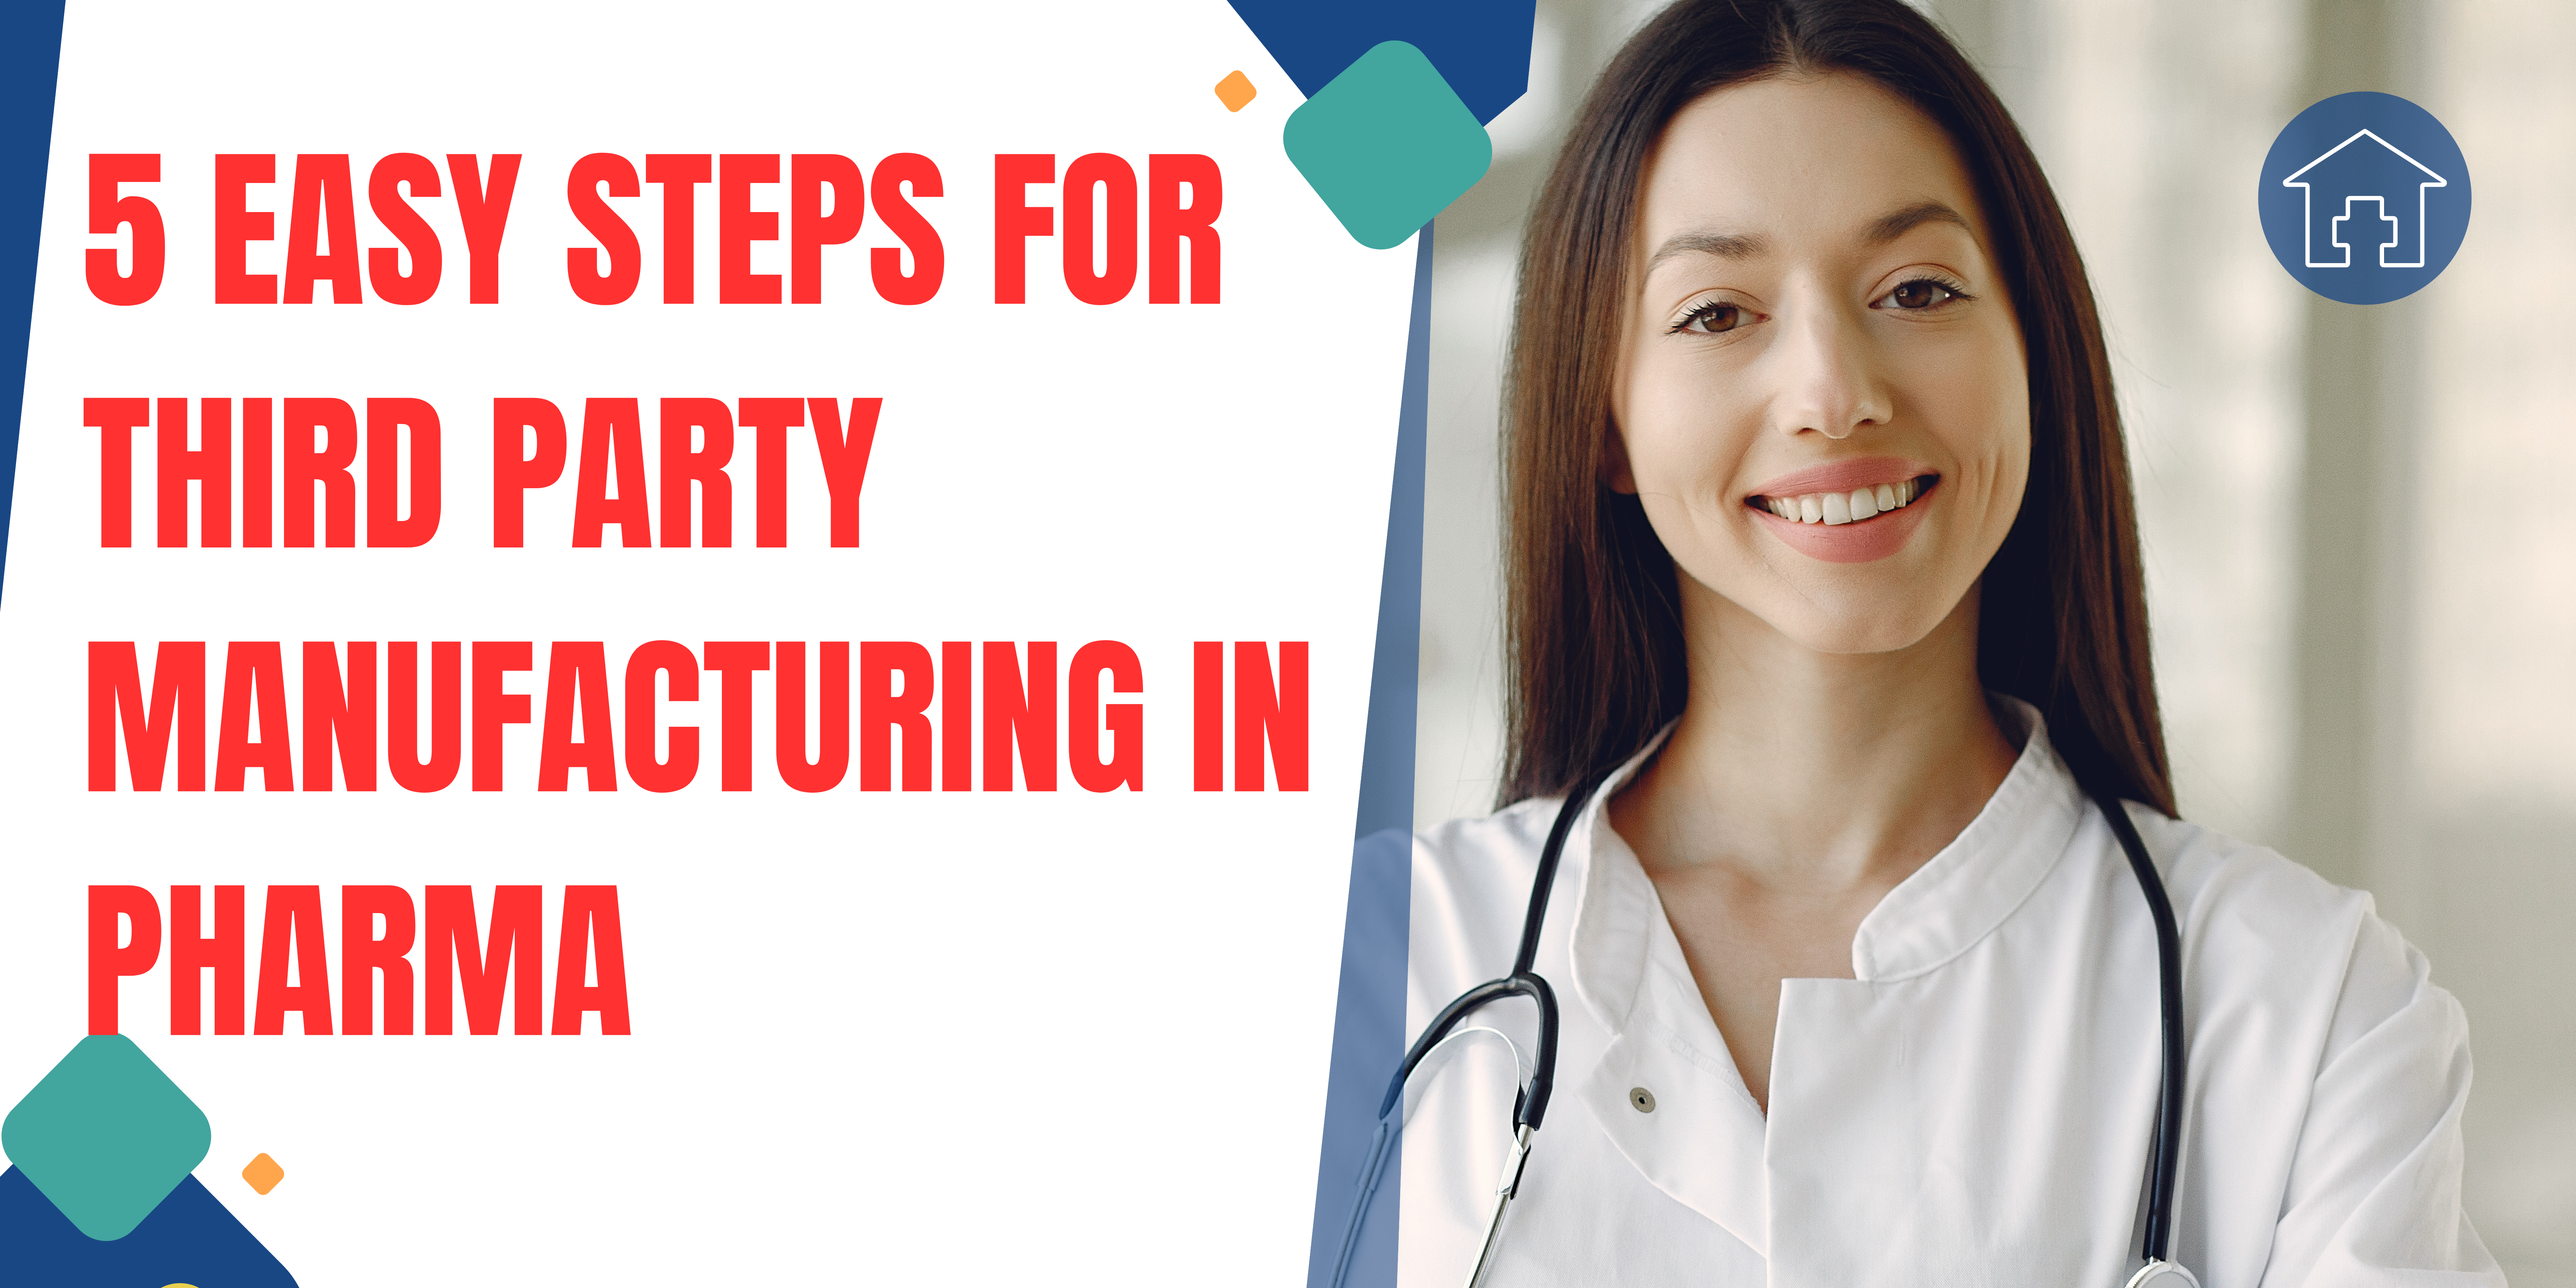 5 EASY STEPS FOR THIRD PARTY MANUFACTURING IN PHARMA